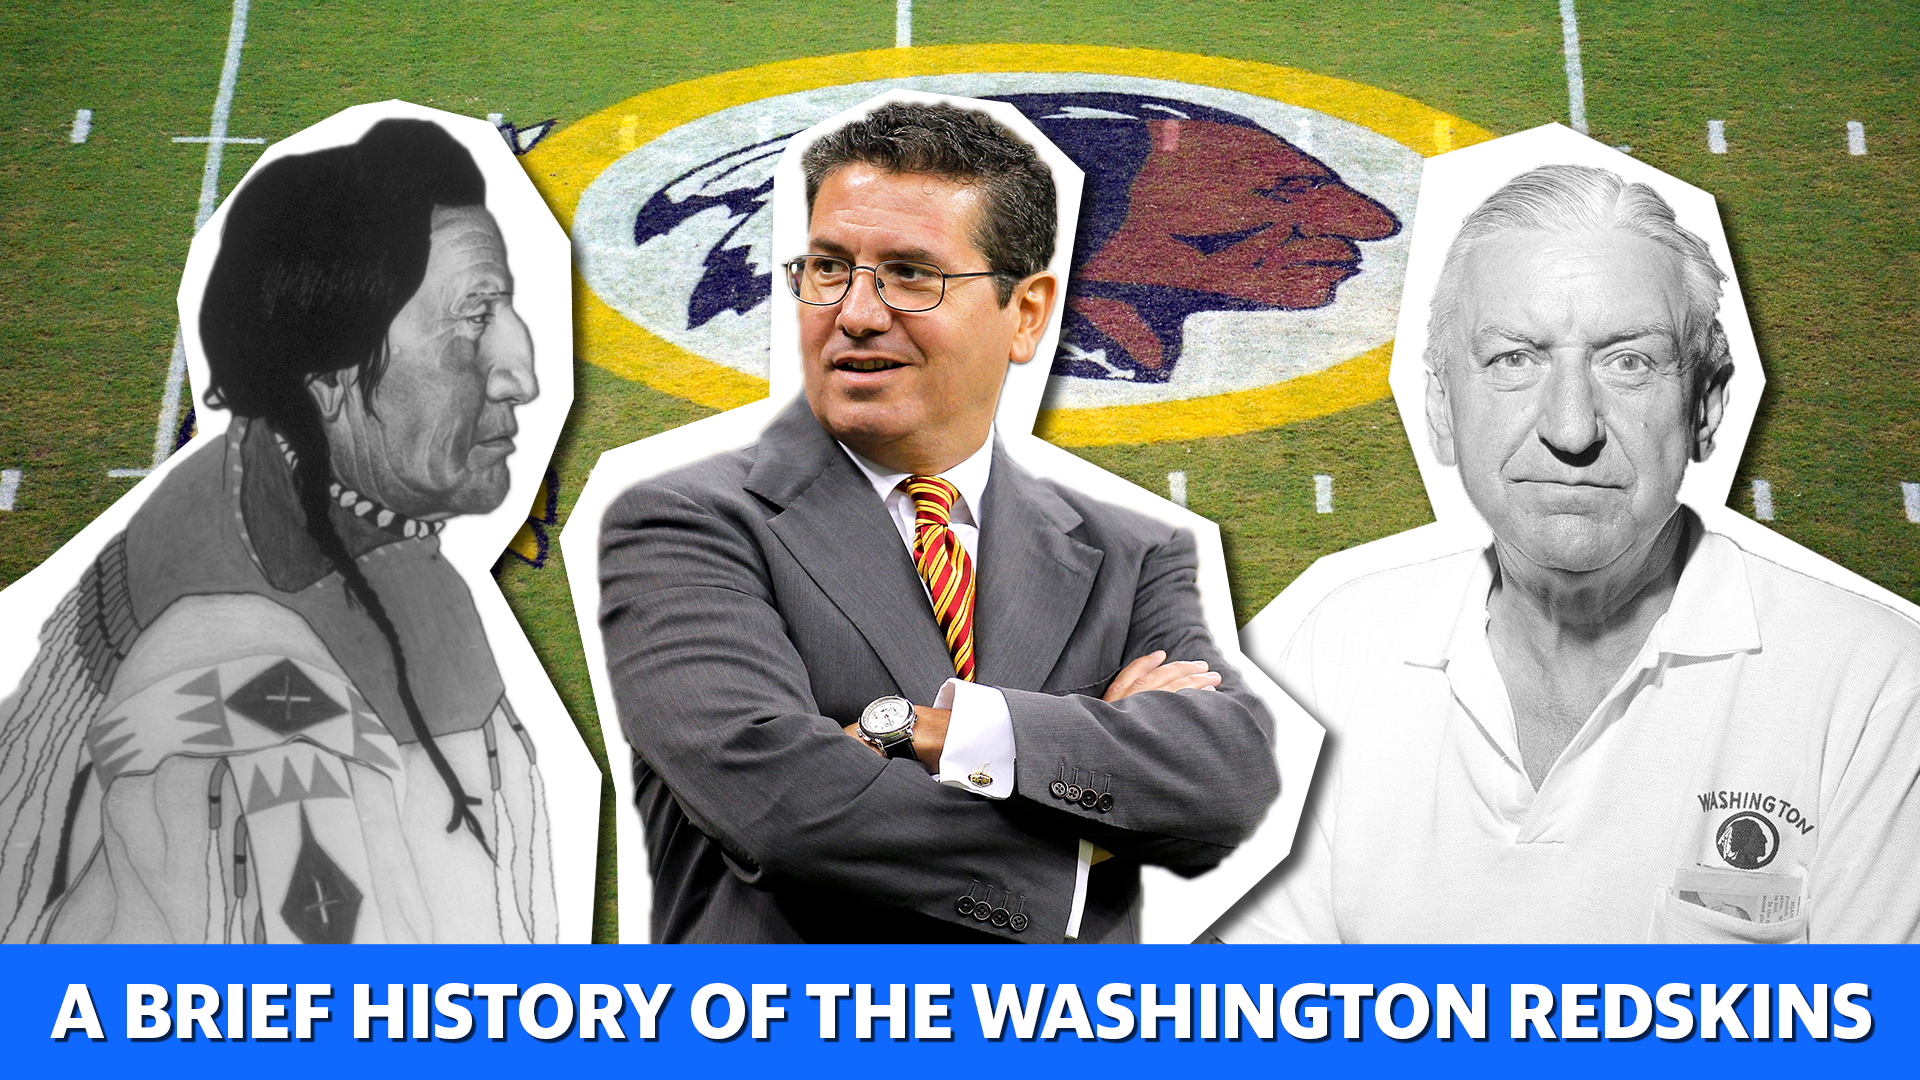 Founding family of Redskins logo mixed on its retirement